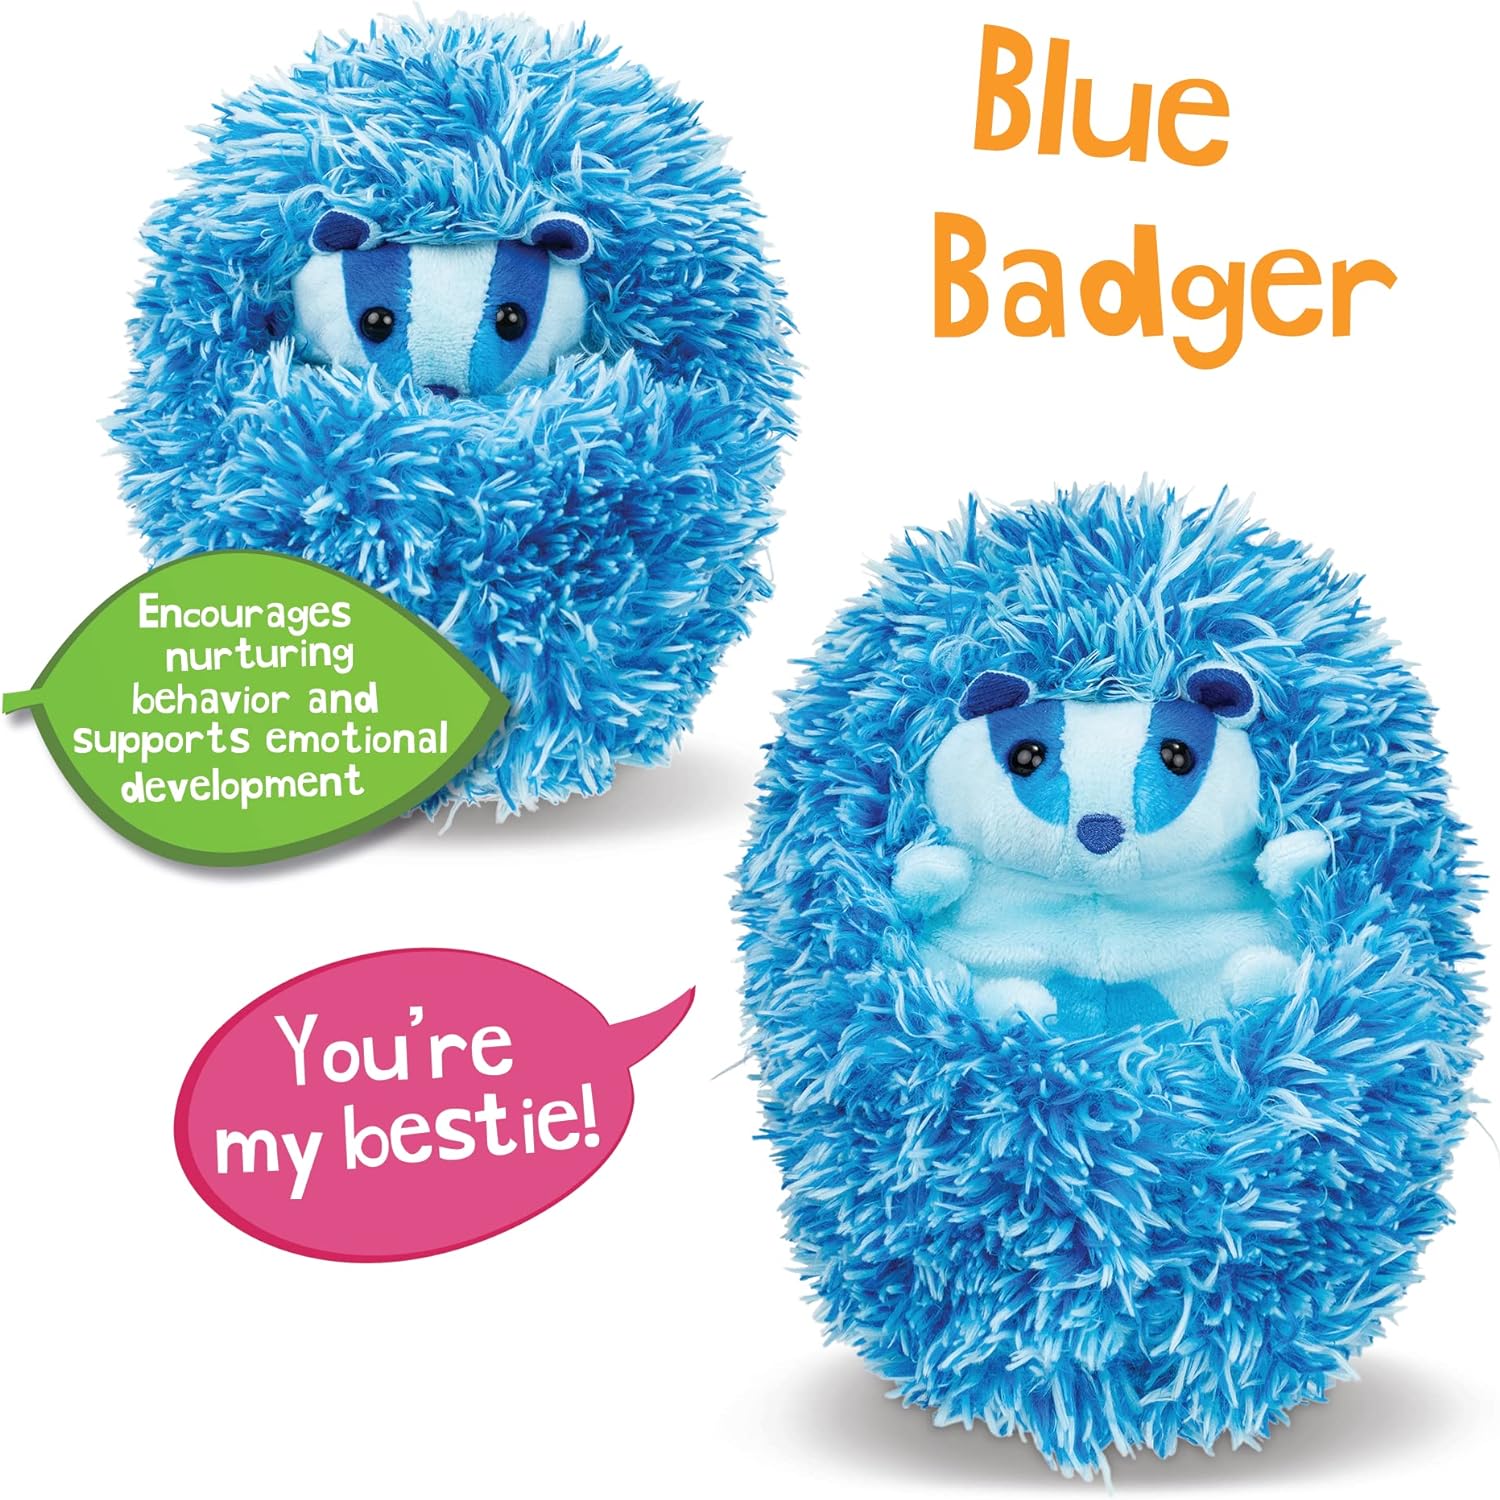 Curlimals Blue The Badger - Interactive Animated Talking Giggling Toy Pet – Blue